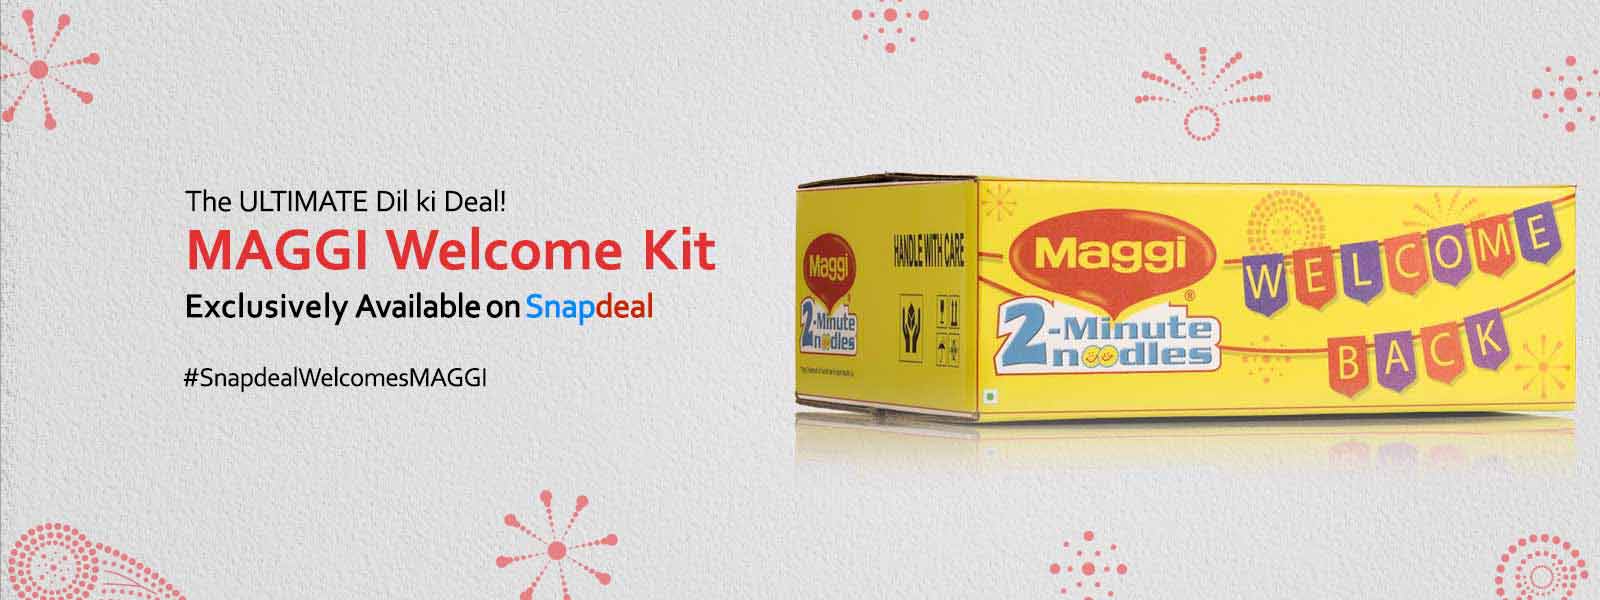 snapdeal-maggi-welcome-kit-exclusive-book-now-sale-banner